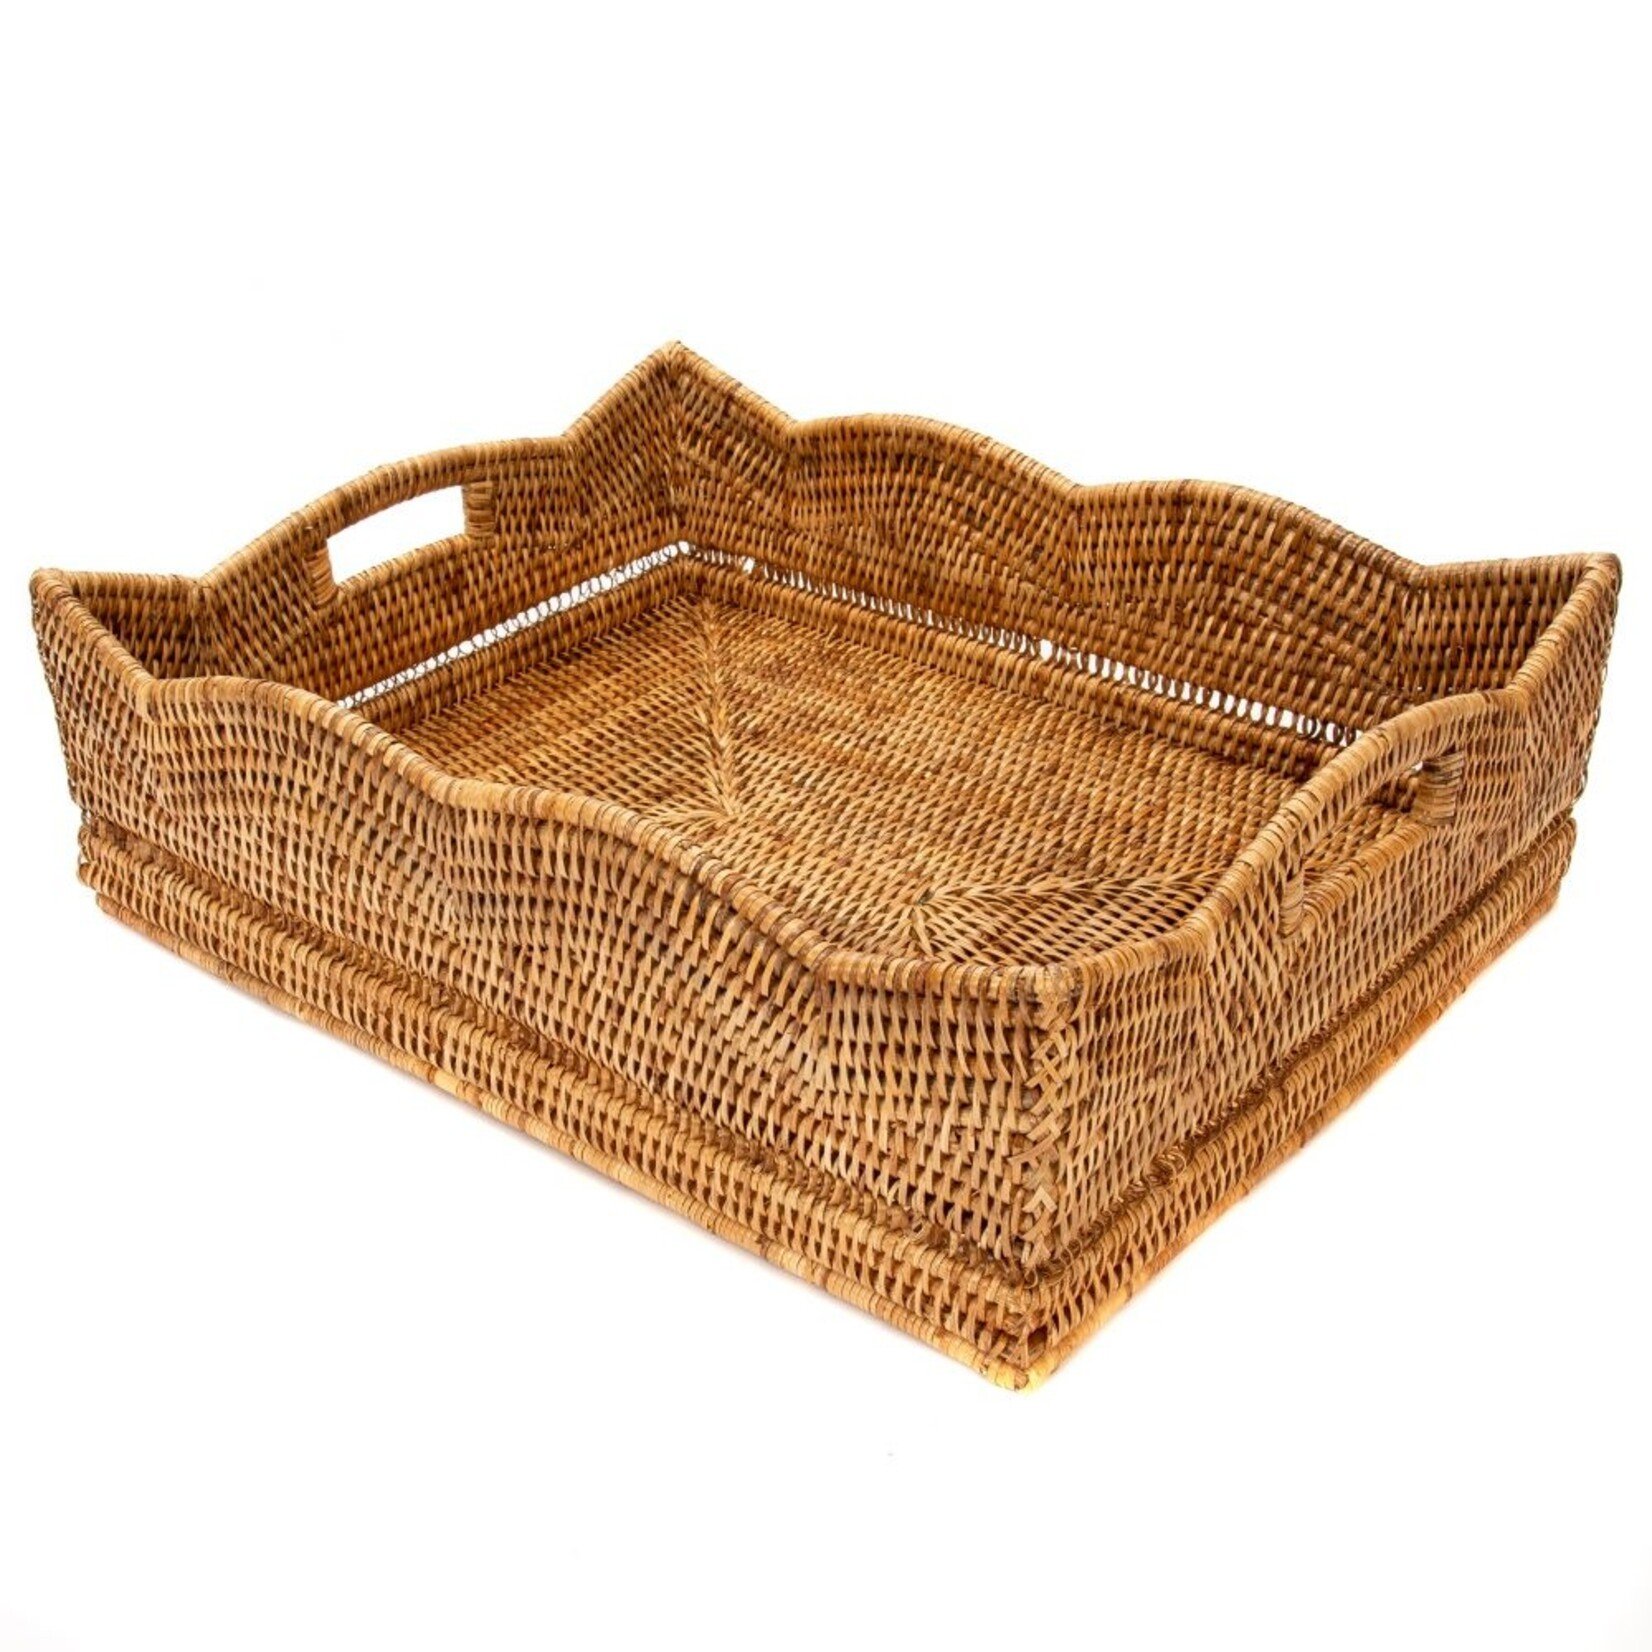 Artifacts Trading Company Scalloped Rattan Baskets